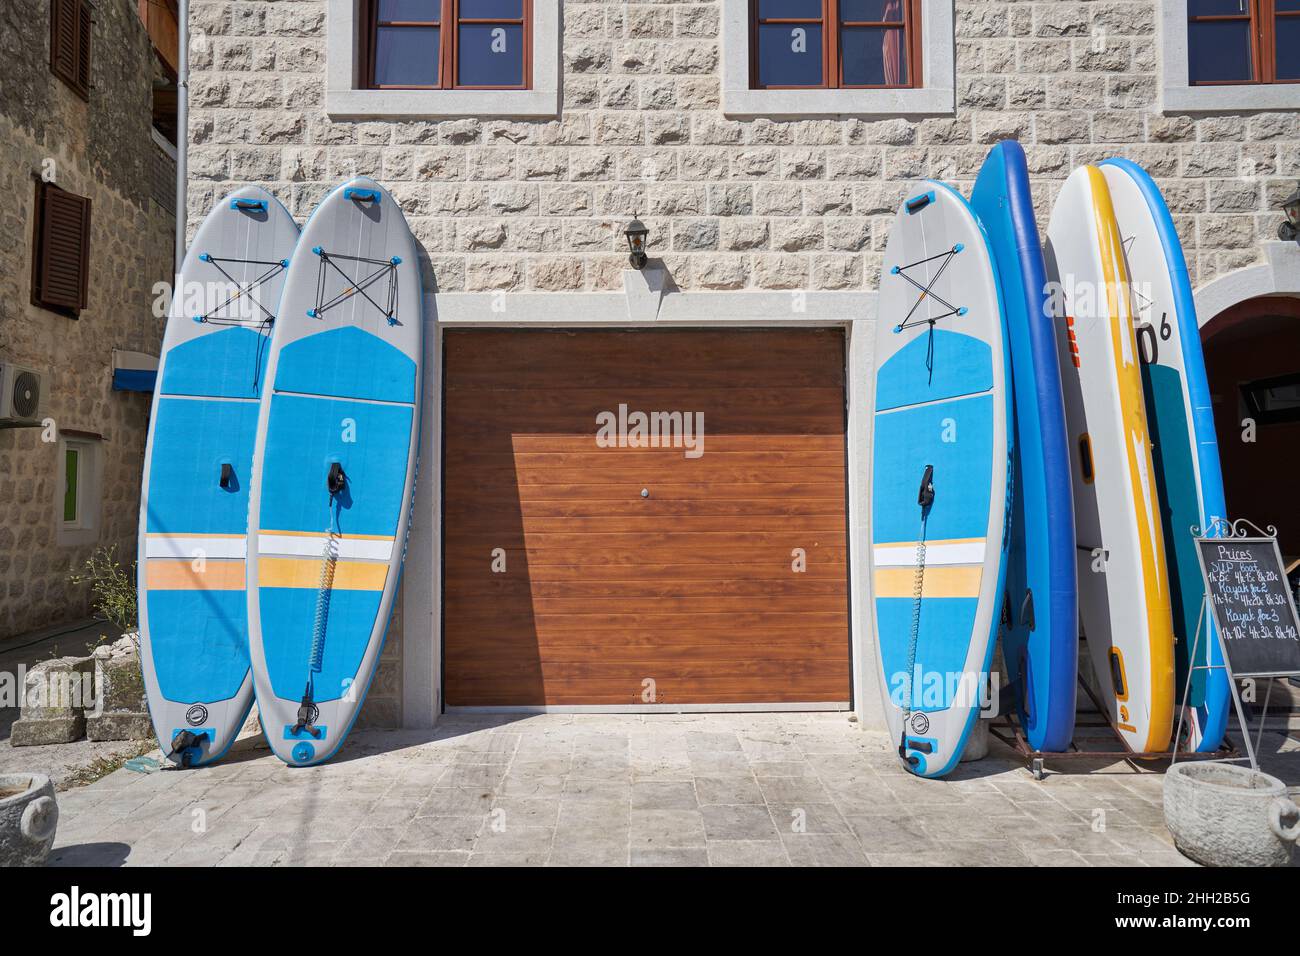 Sup boards for rent near the facade of a private house. Stock Photo